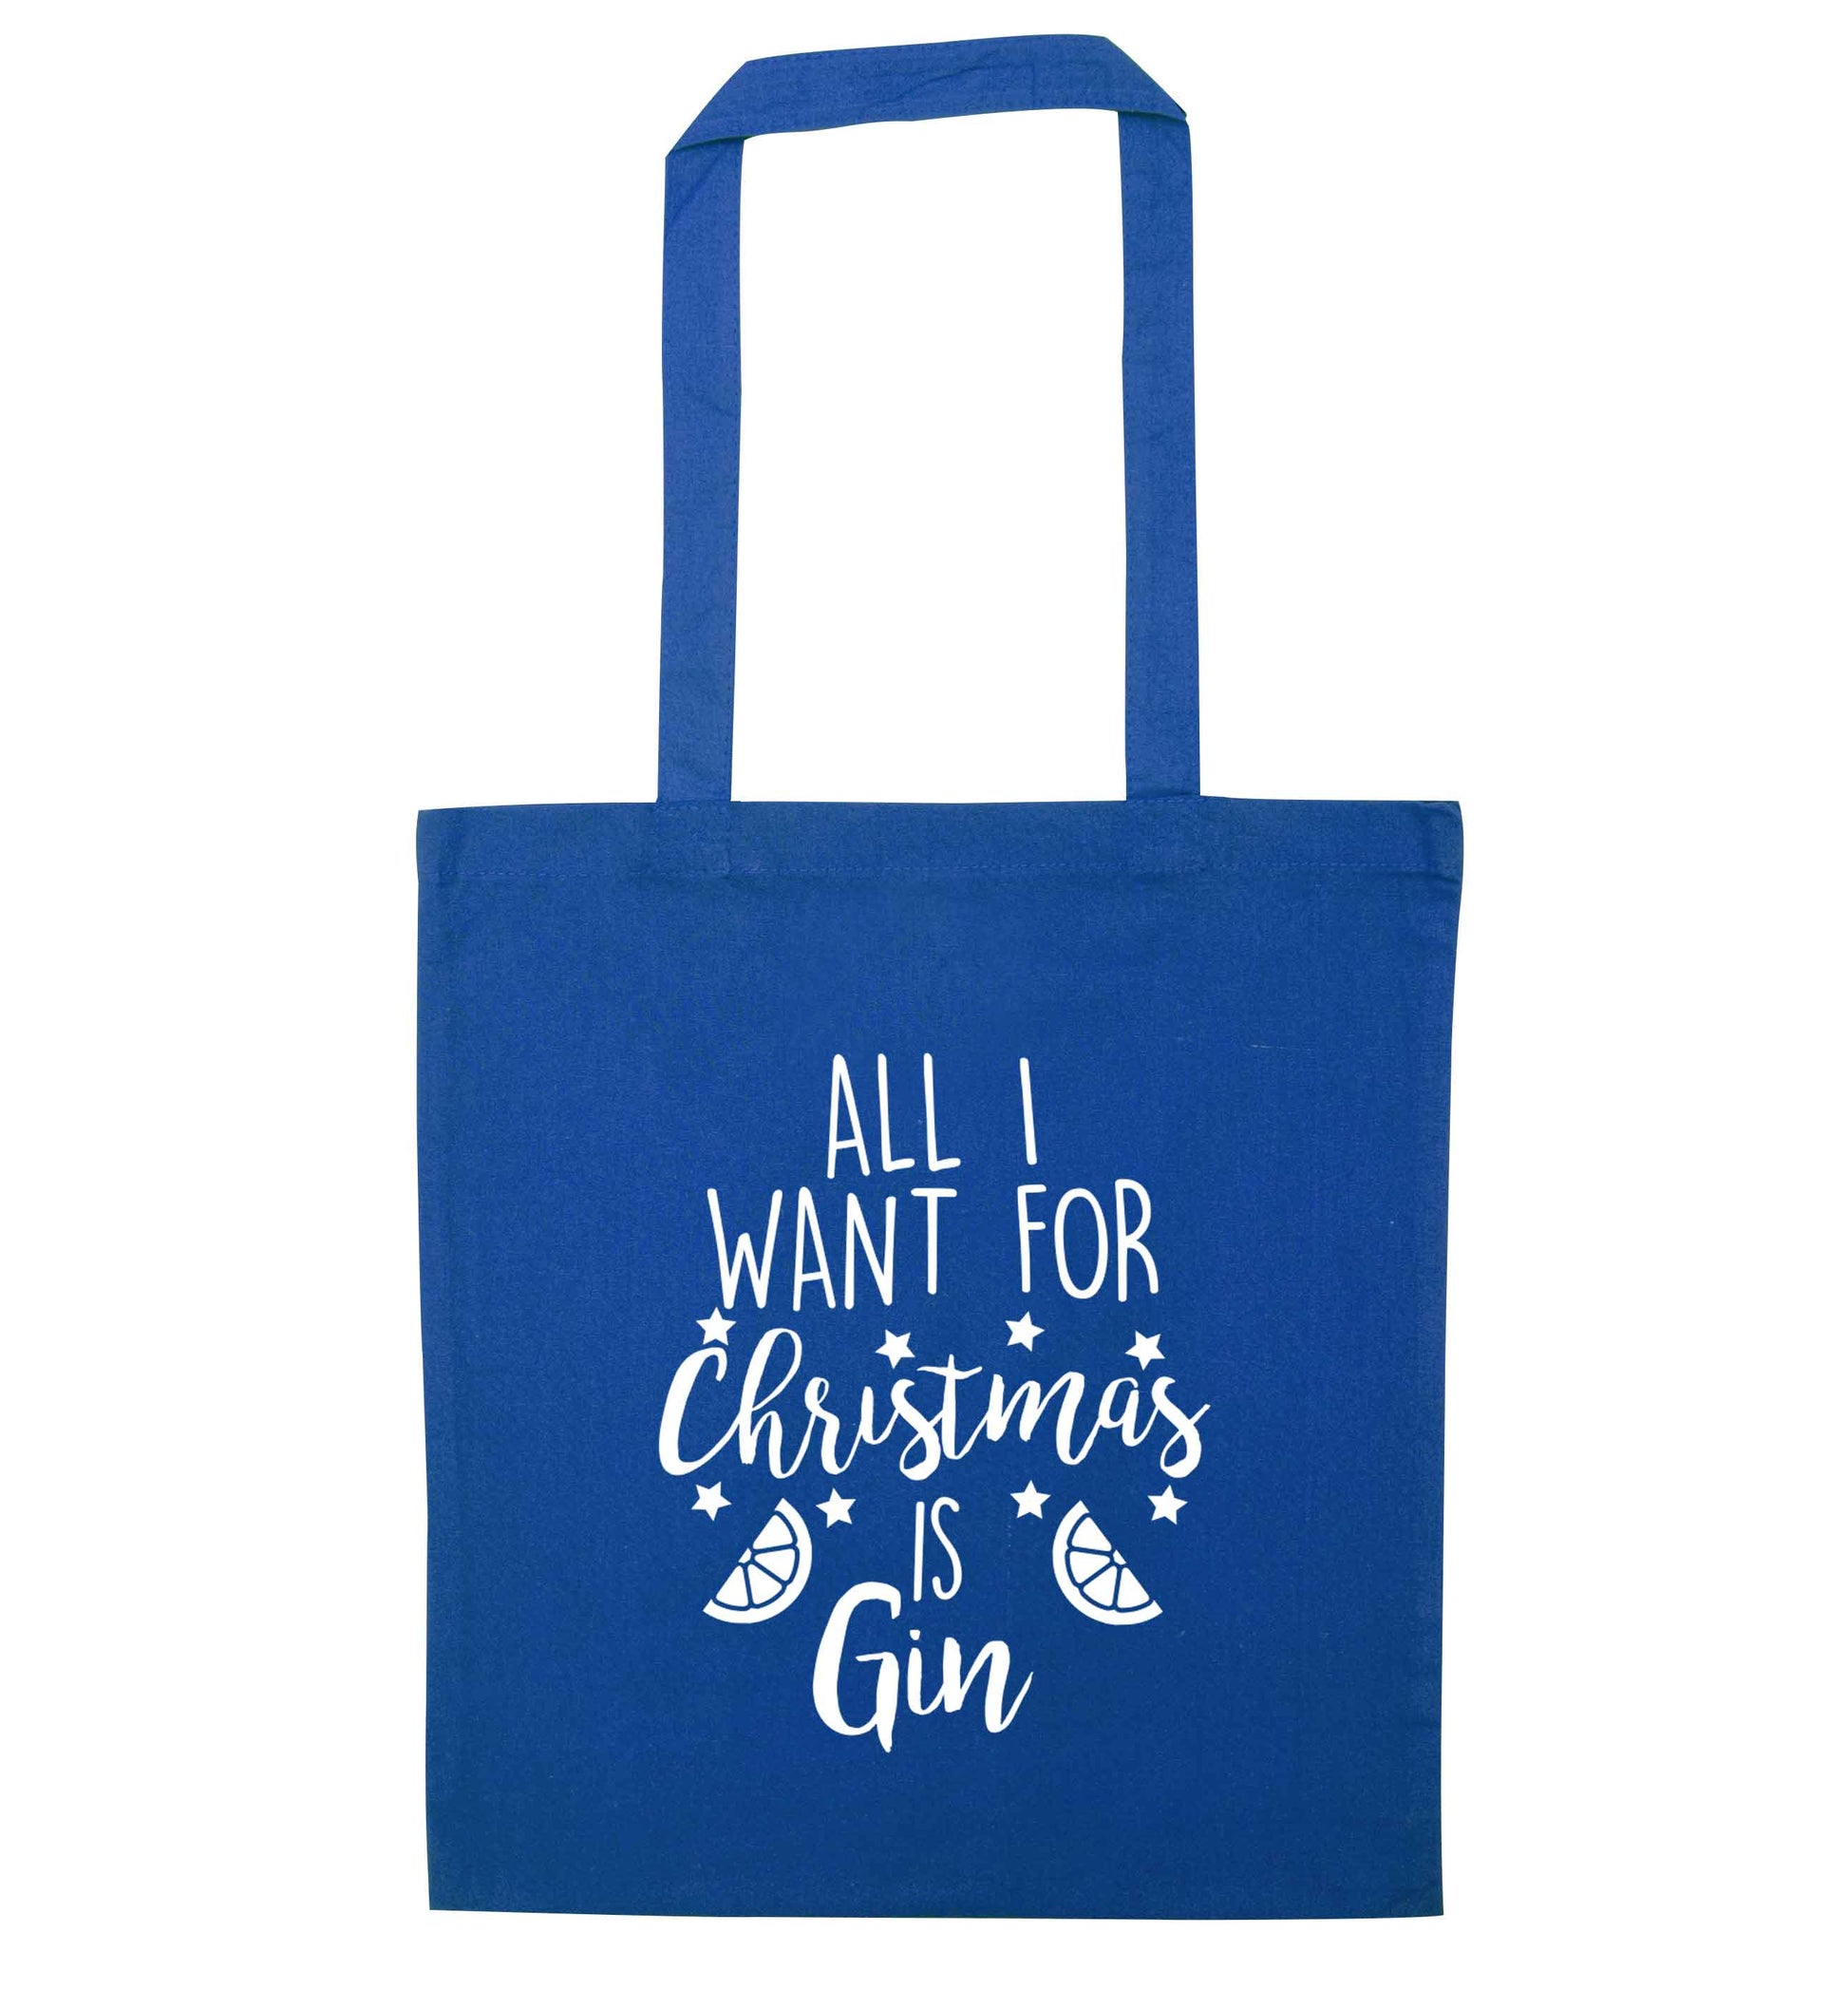 All I want for Christmas is gin blue tote bag